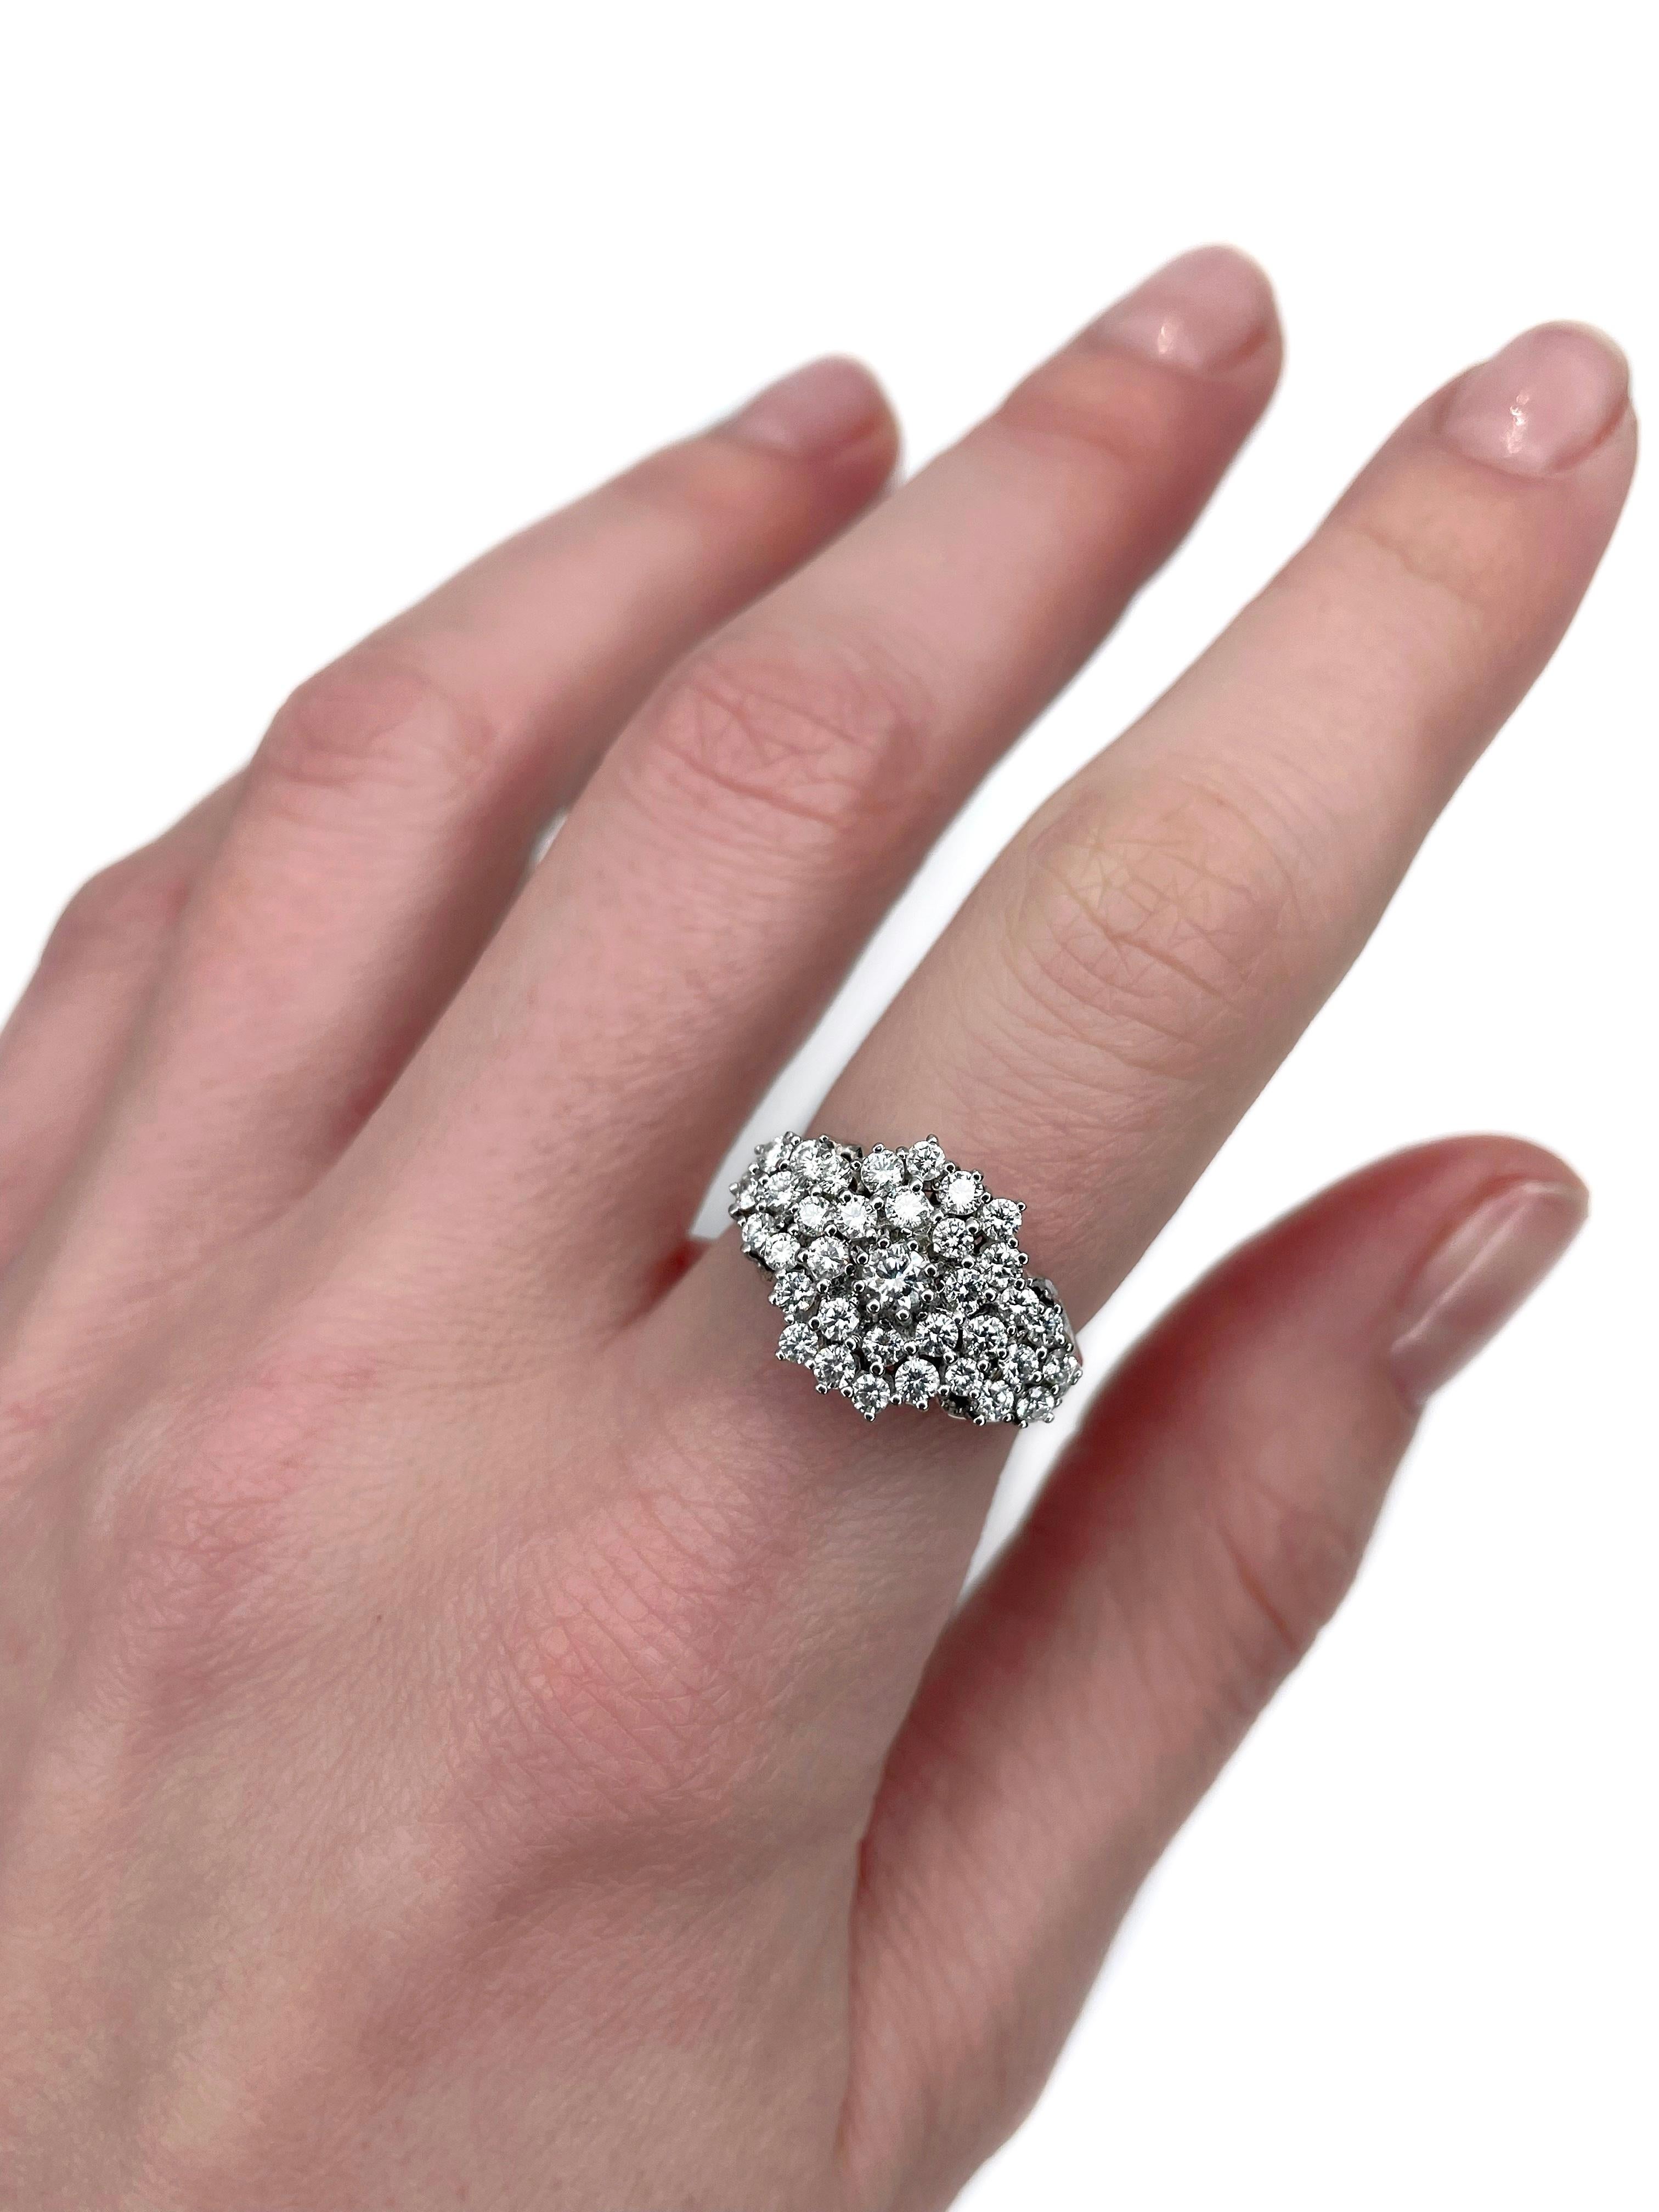 This is a vintage cocktail ring crafted in 14K white gold. Circa 1980.

 It features diamonds (TW 1.04ct):
- 1pc., brilliant cut, 0.09ct, RW+/RW, VS
- 36pcs., brilliant cut, TW 0.95ct, RW+/RW, VS-SI

Weight: 5.12g 
Size: 16.5 (US 6)

IMPORTANT: